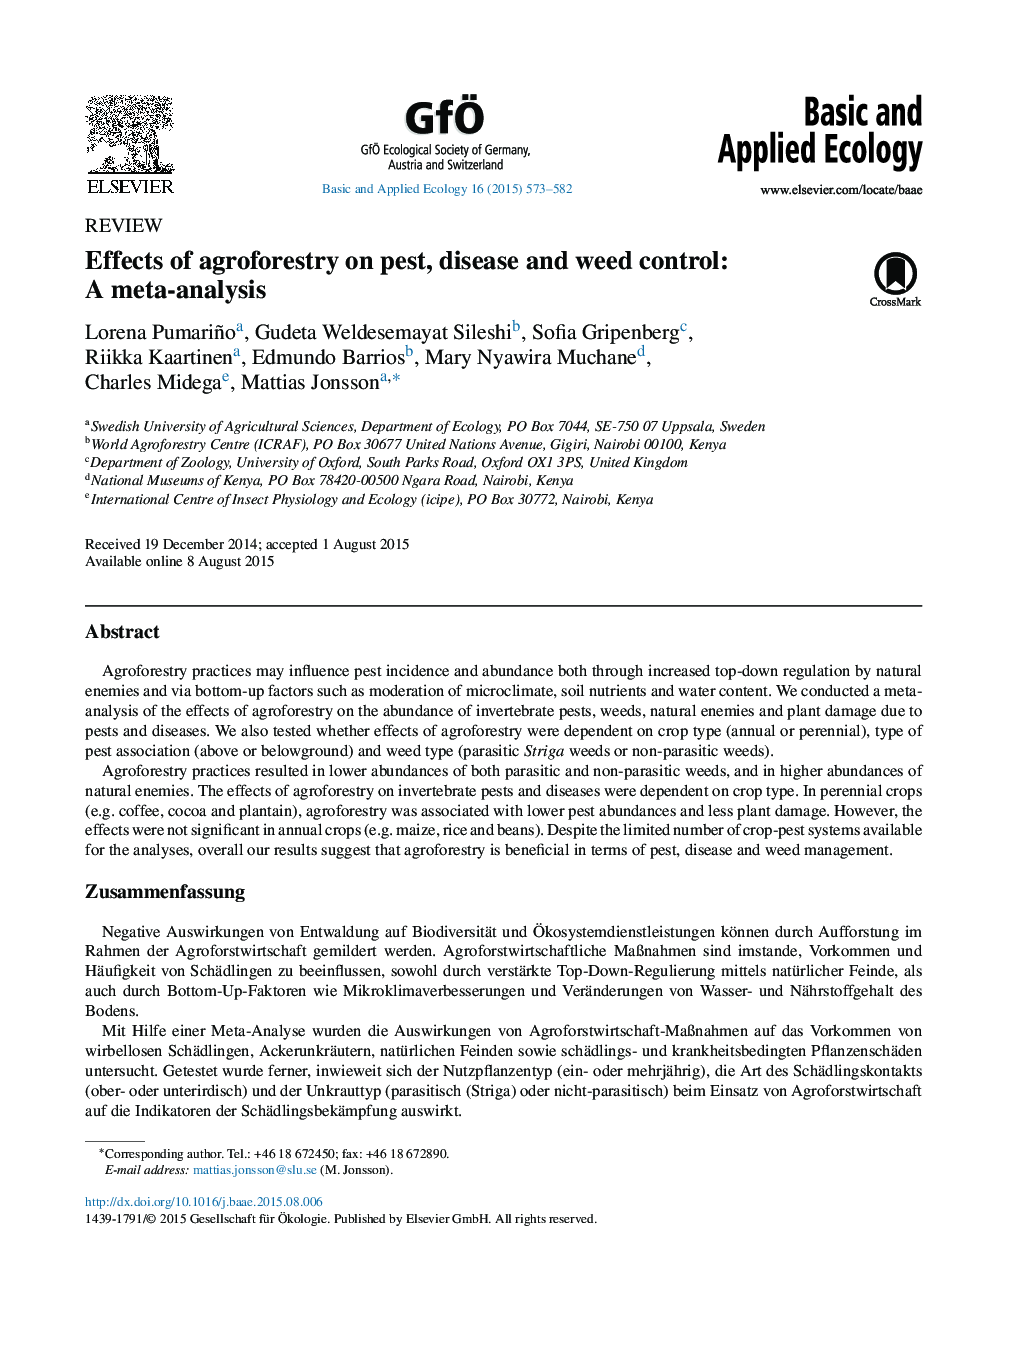 Effects of agroforestry on pest, disease and weed control: A meta-analysis